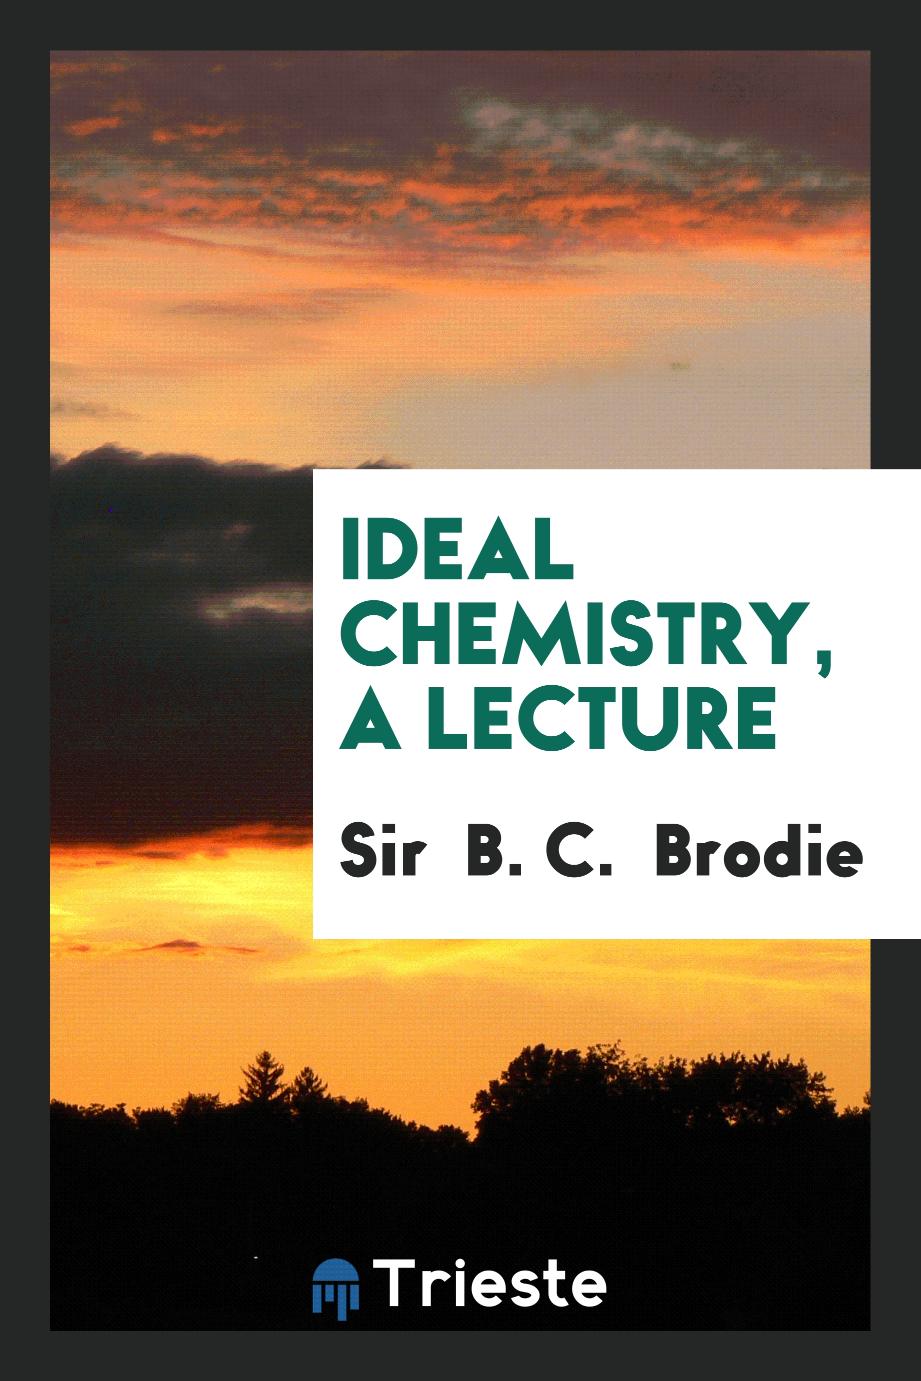 Ideal chemistry, a lecture